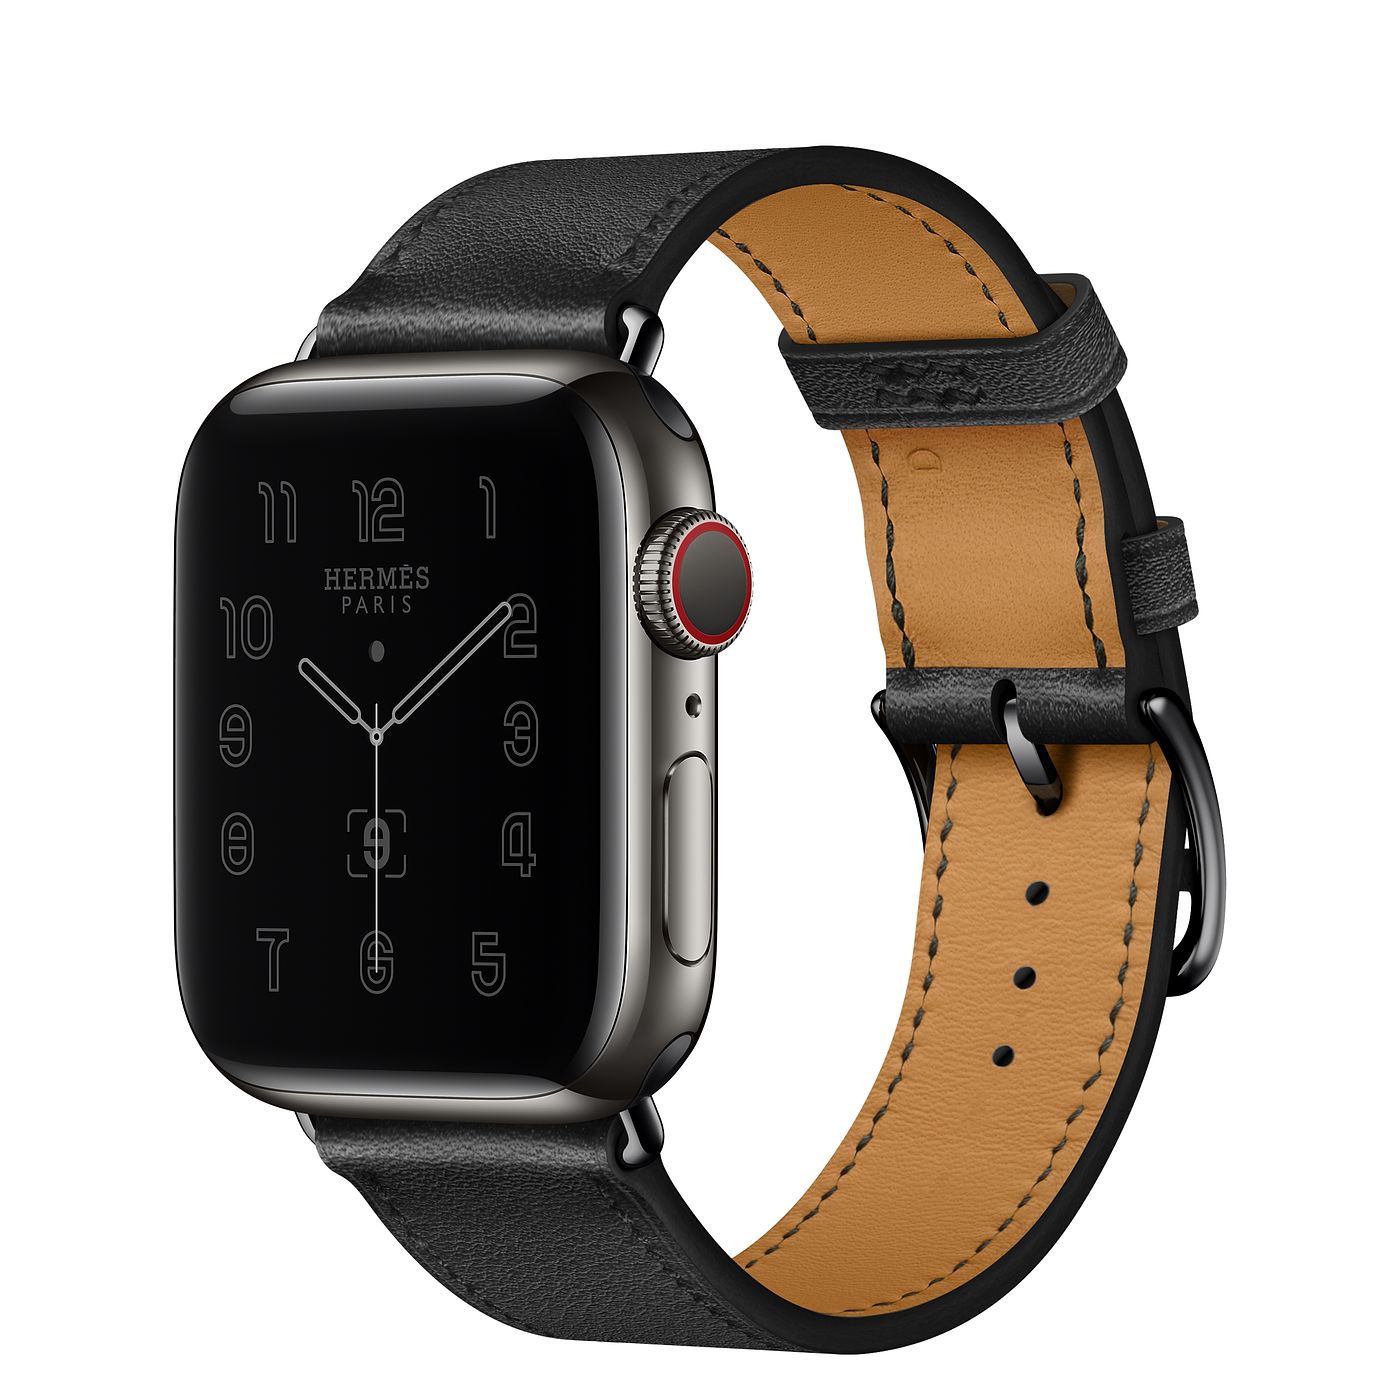 Confused… Starlight w/Gold Milanese or Stainless Steel Silver/Graphite  Milanese | MacRumors Forums